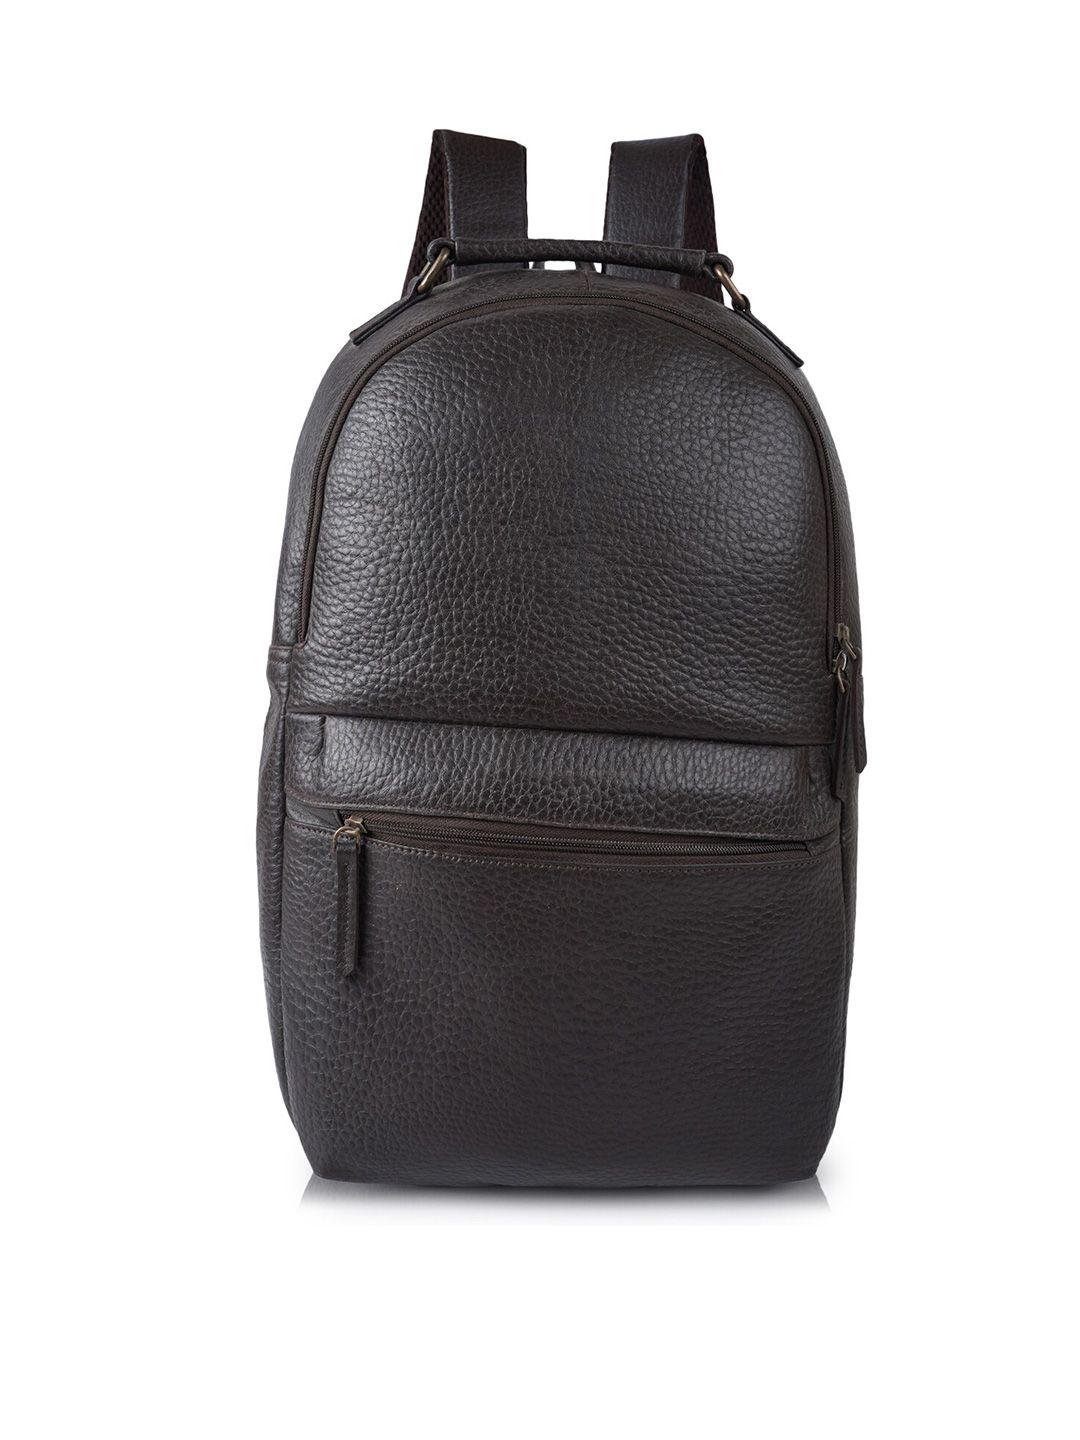 cimoni textured water resistant backpack